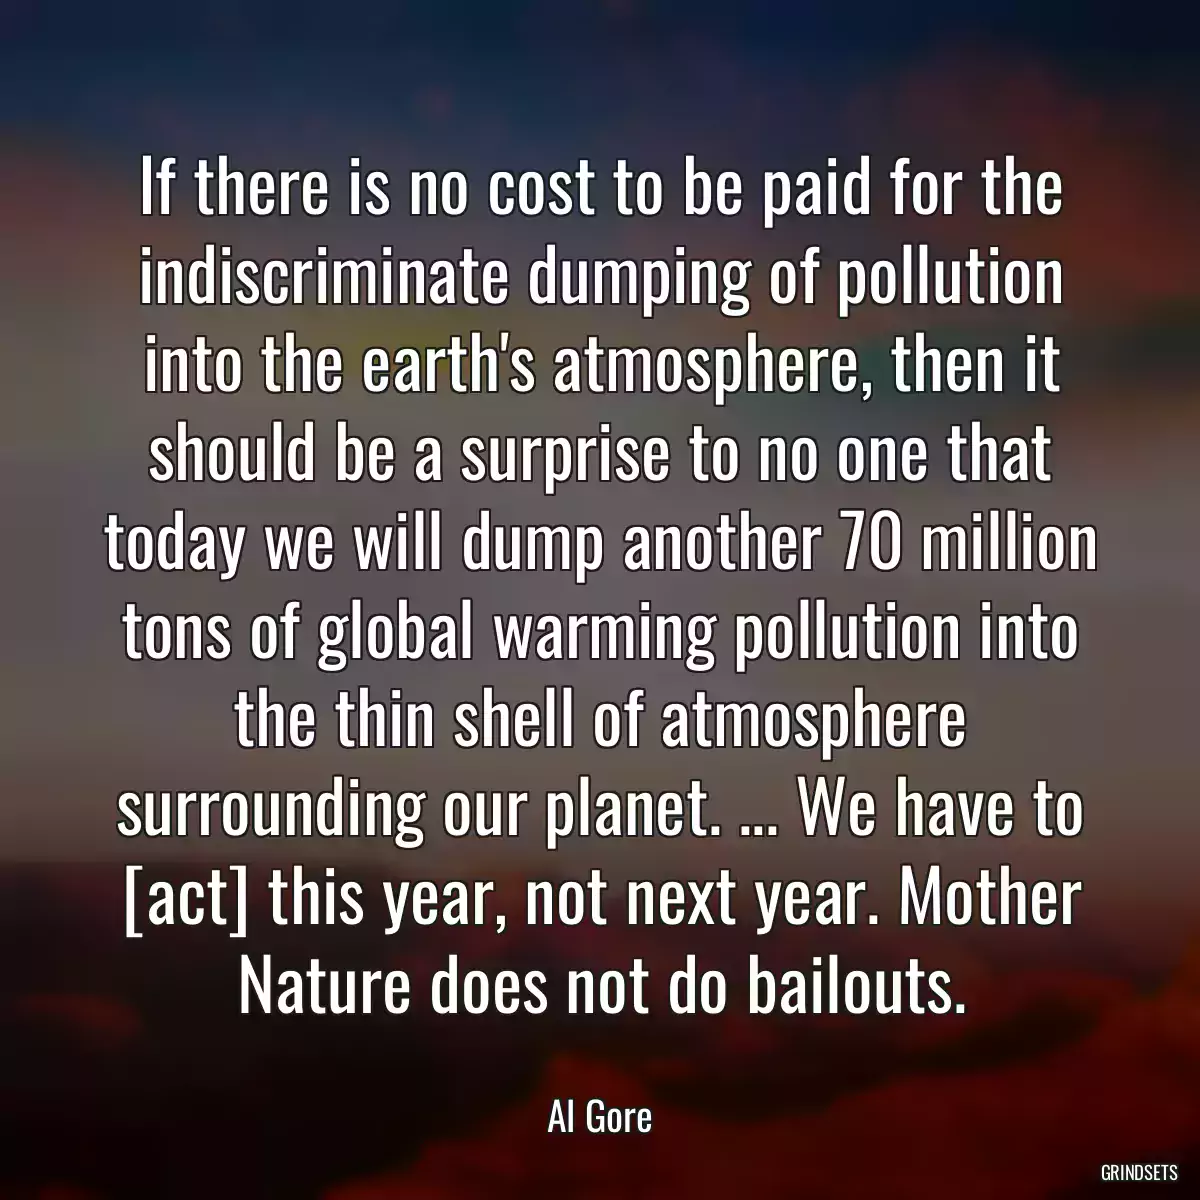 If there is no cost to be paid for the indiscriminate dumping of pollution into the earth\'s atmosphere, then it should be a surprise to no one that today we will dump another 70 million tons of global warming pollution into the thin shell of atmosphere surrounding our planet. ... We have to [act] this year, not next year. Mother Nature does not do bailouts.